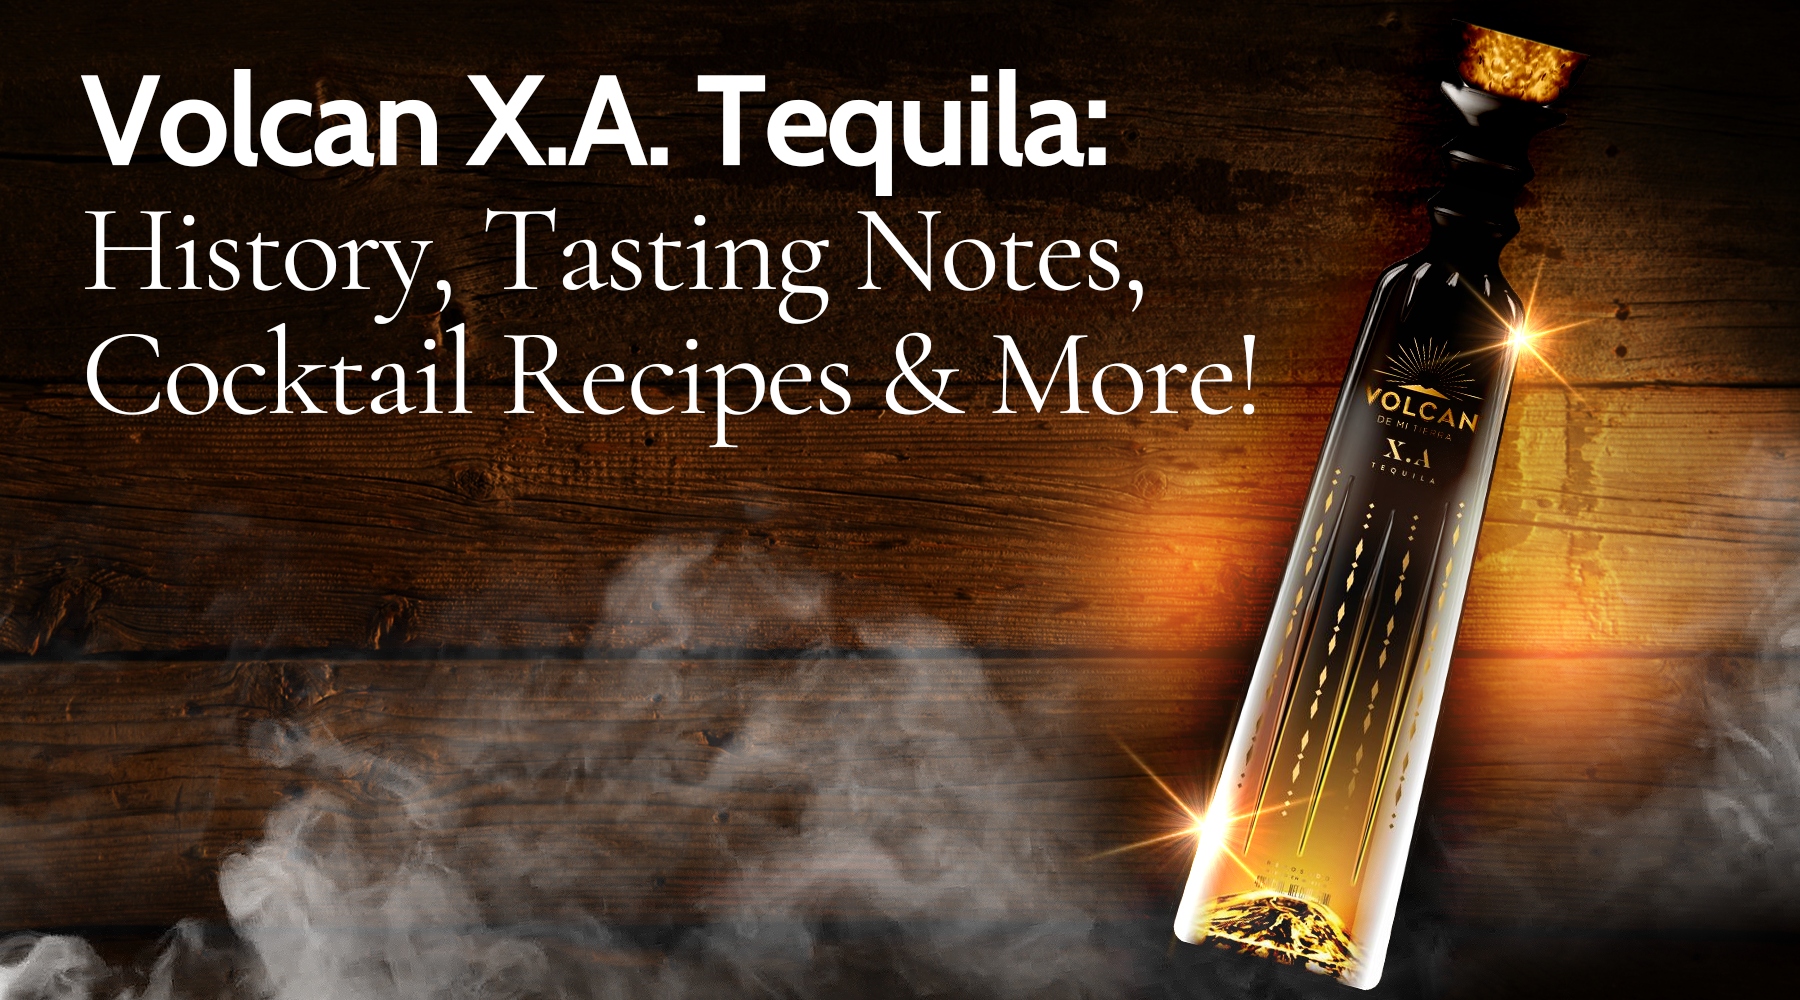 Volcan X.A. Tequila: History, Tasting Notes, Cocktail Recipes & More!